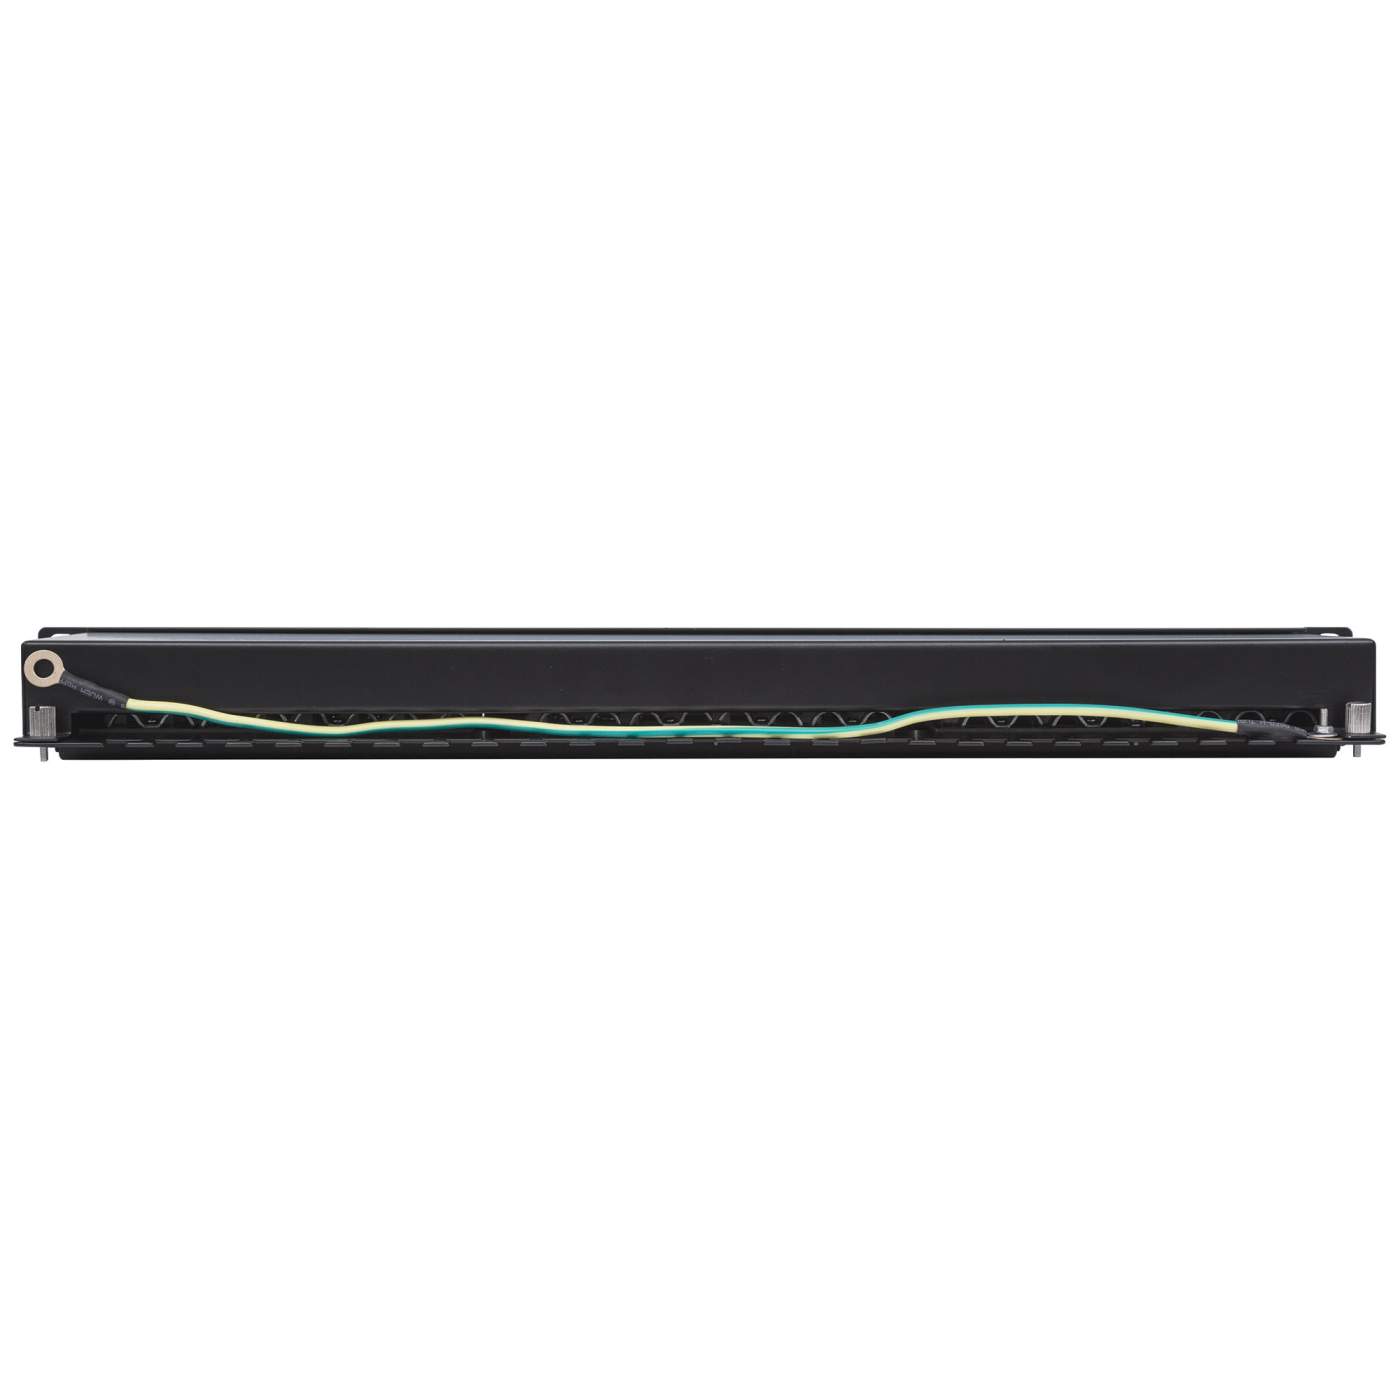 Cat6a Shielded Patch Panel Image 4